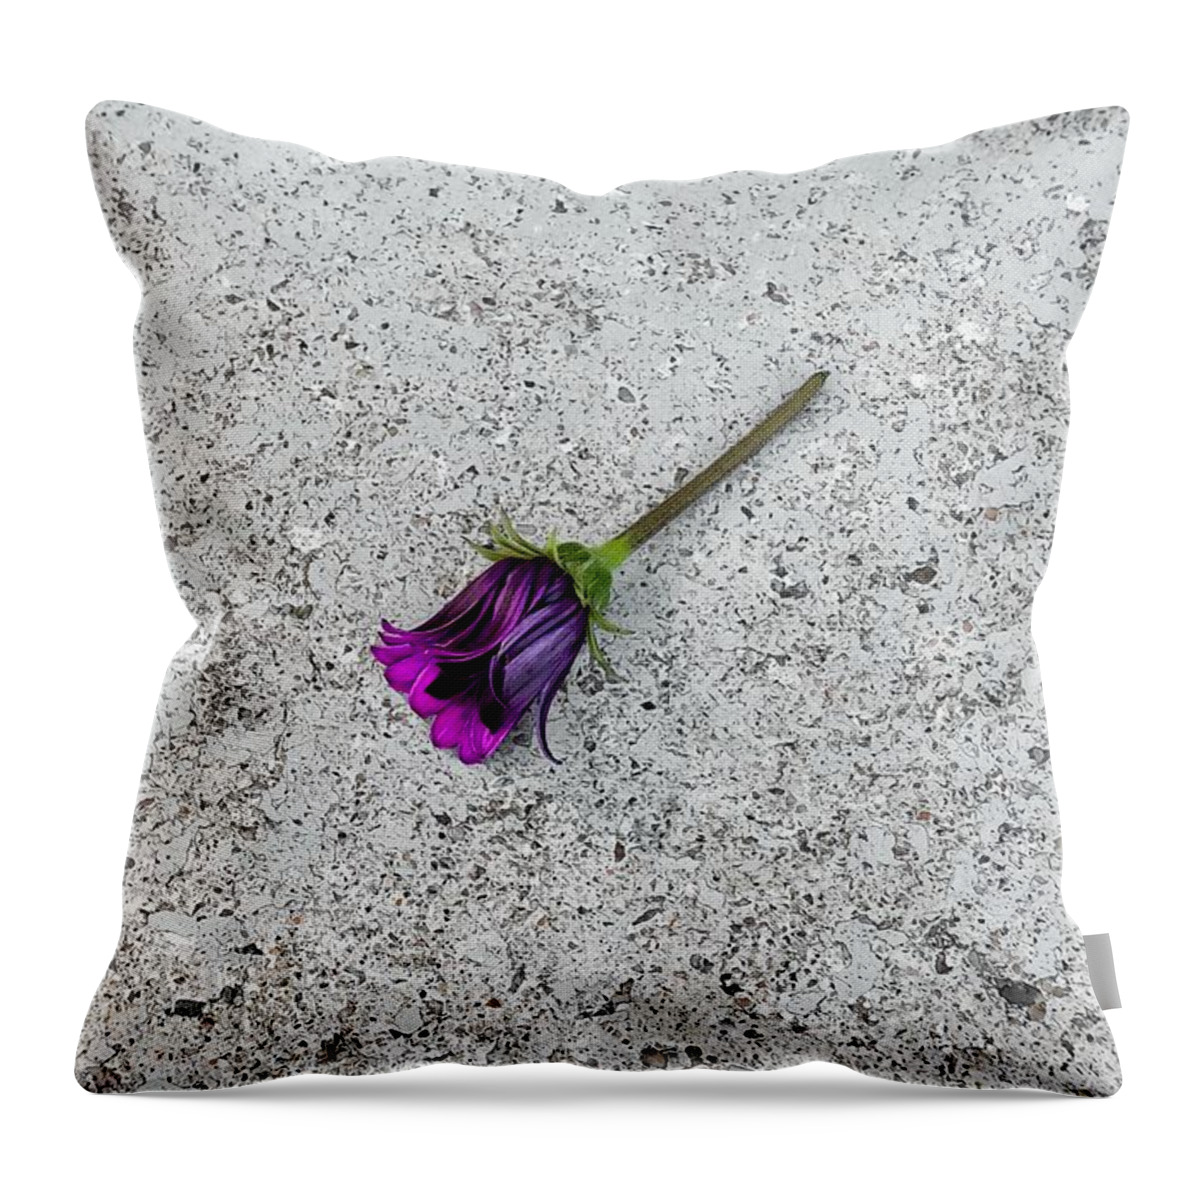 Flower Throw Pillow featuring the photograph Alone by Alison Frank